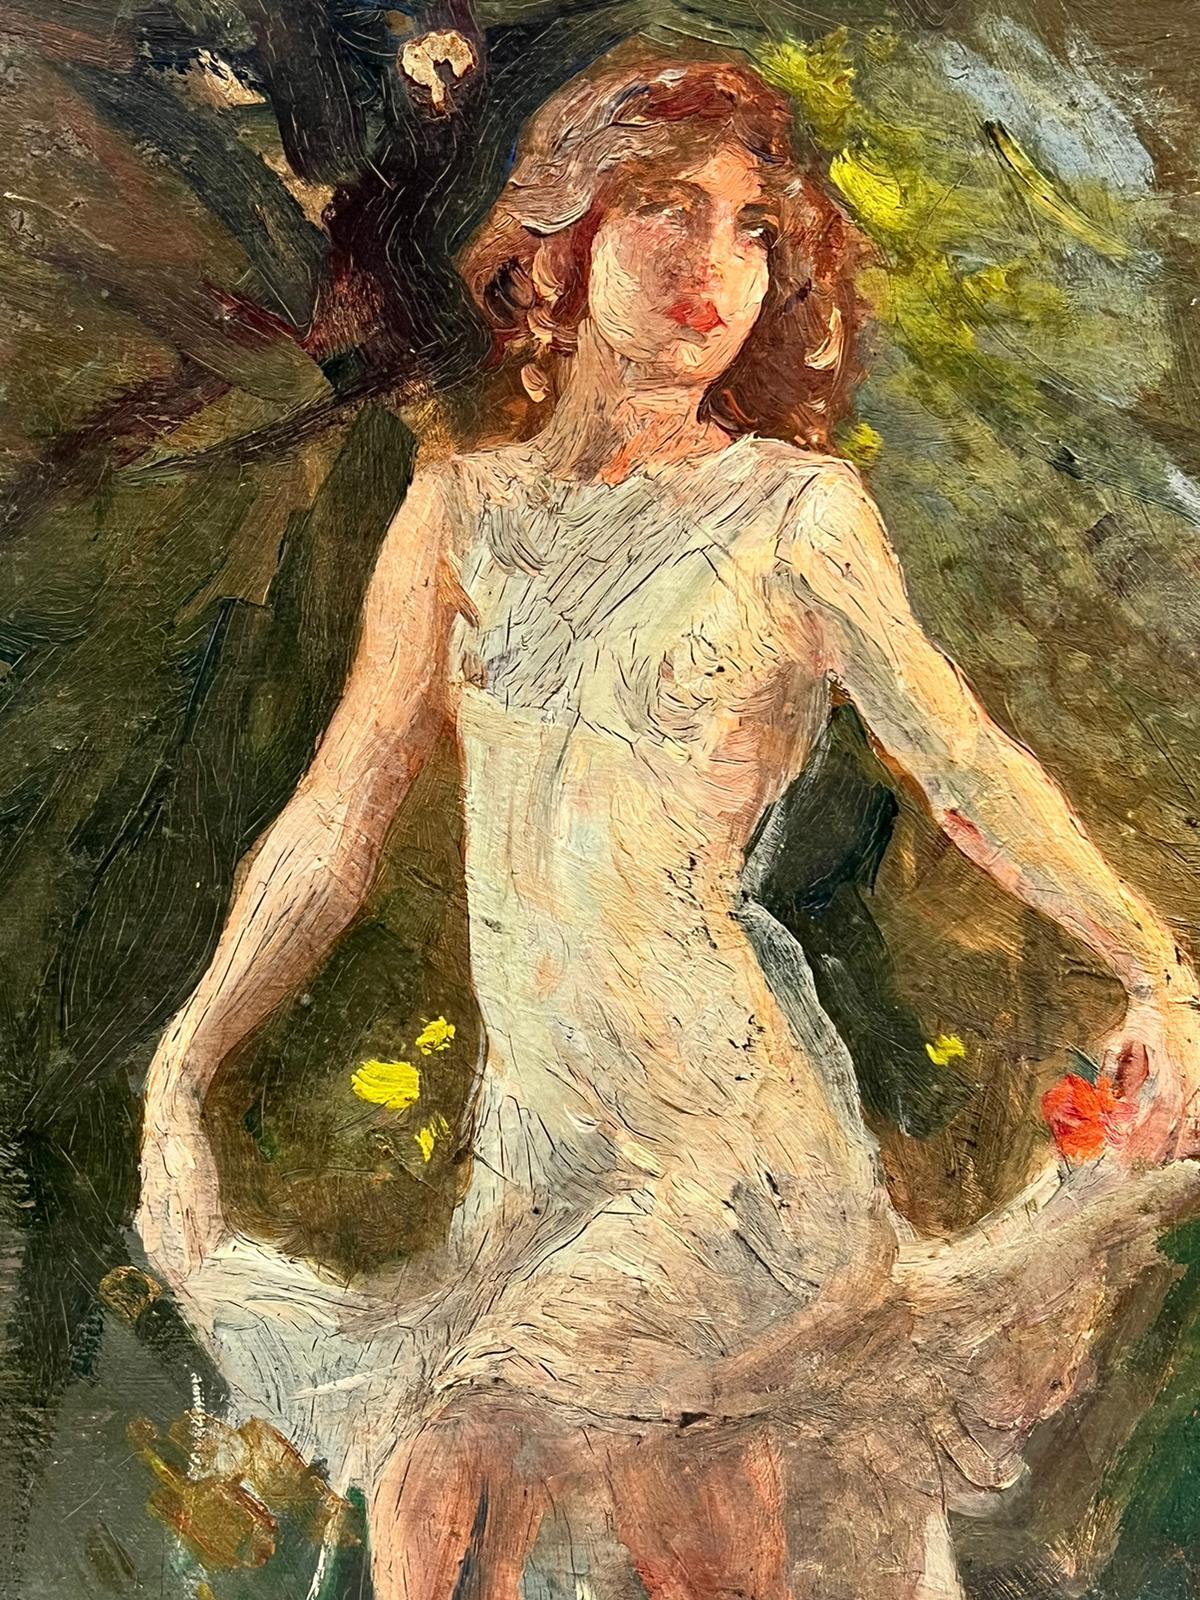 Lady in White Dress Dancing in Garden Beautiful Impressionist Oil Sketch  - Painting by Antique English 